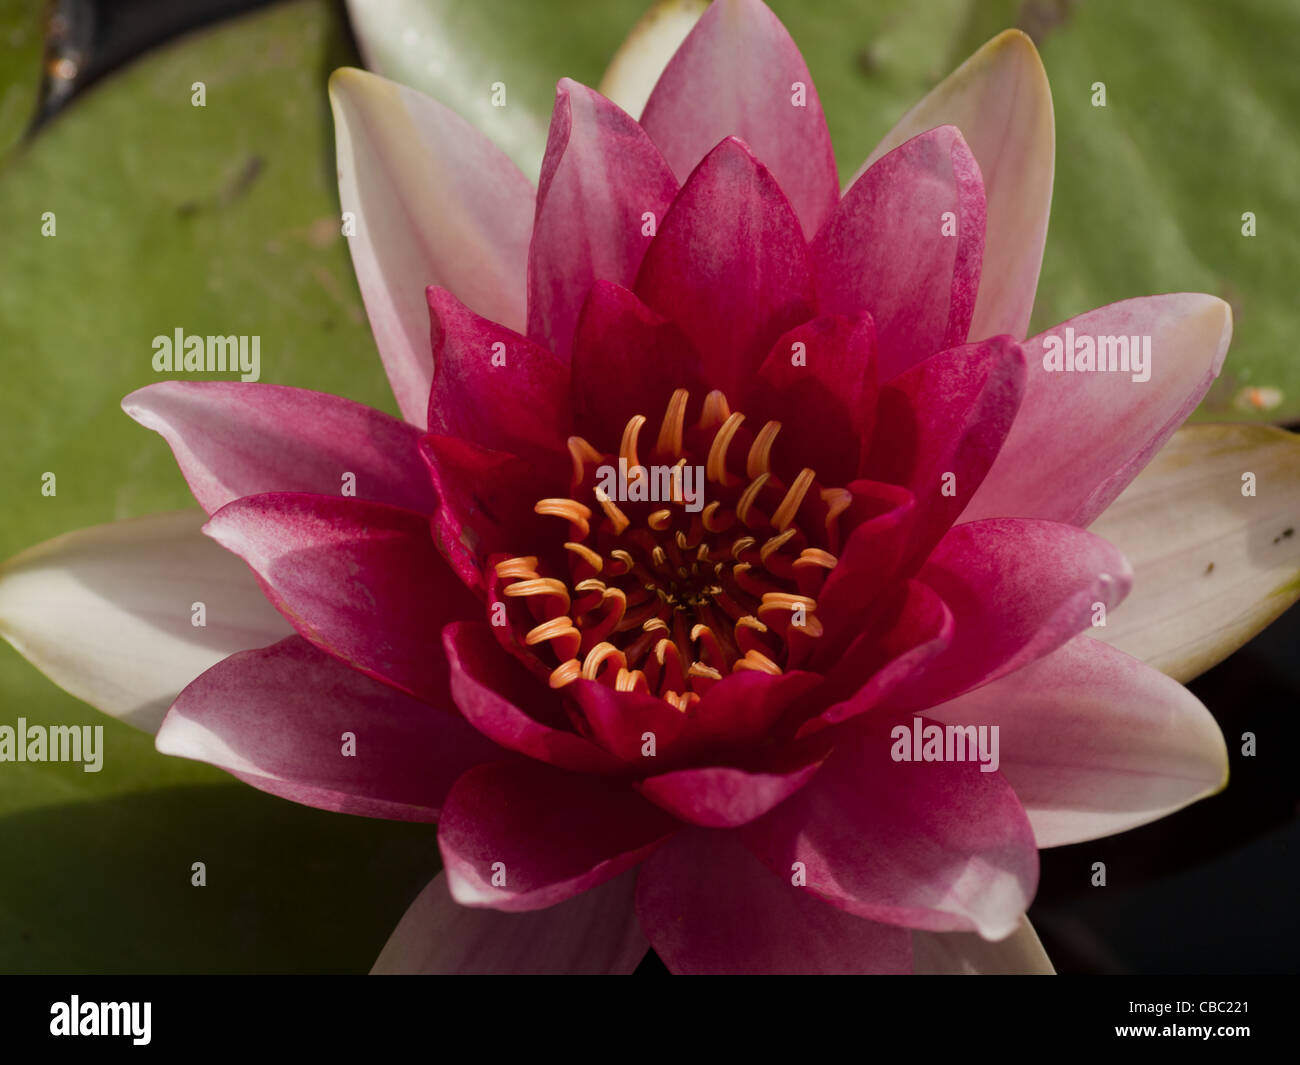 Nymphaea 'Sirius' Water Lily. Named for the brightest star in the sky, this oustanding lily lives up to its name by producing large purplish-red flowers in profusion. Leaves are flecked maroon before maturing to all green. Hybridized by Latour-Marliac Nursery in 1913. Stock Photo